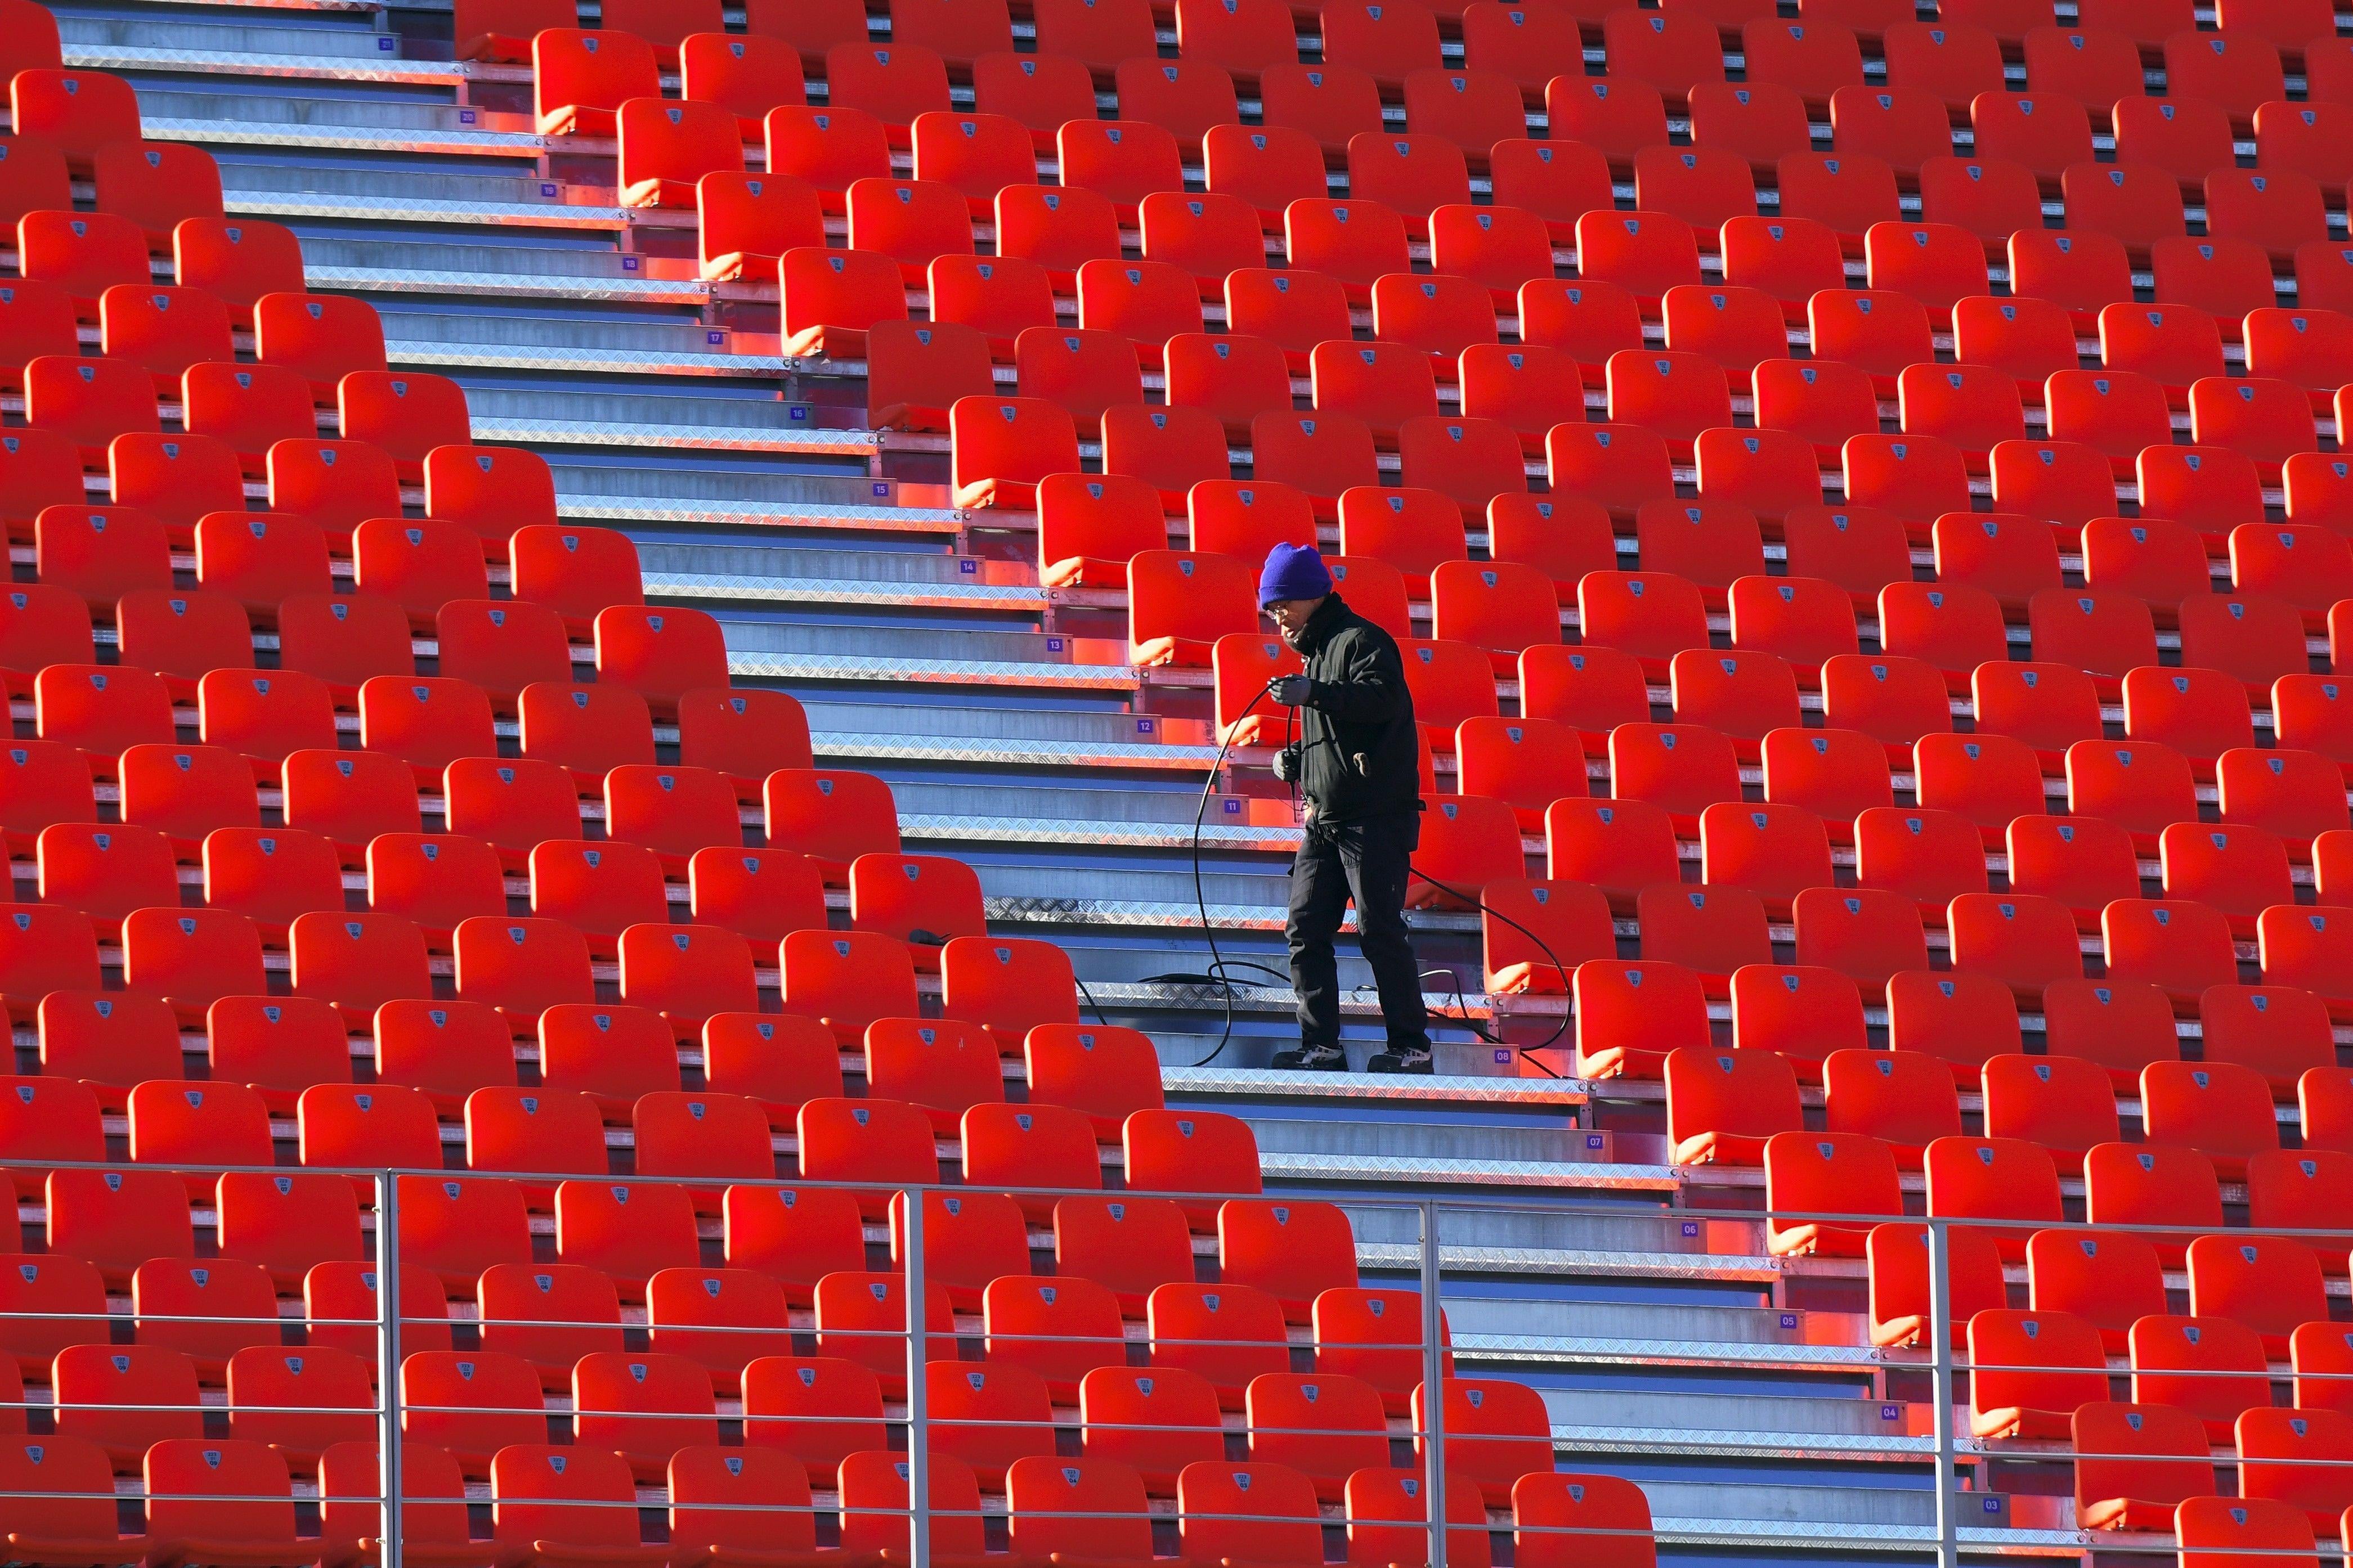 A lone worker sets up a cable at the Olympic Stadium in Pyeongchang, surrounded by a sea of empty, red seats.